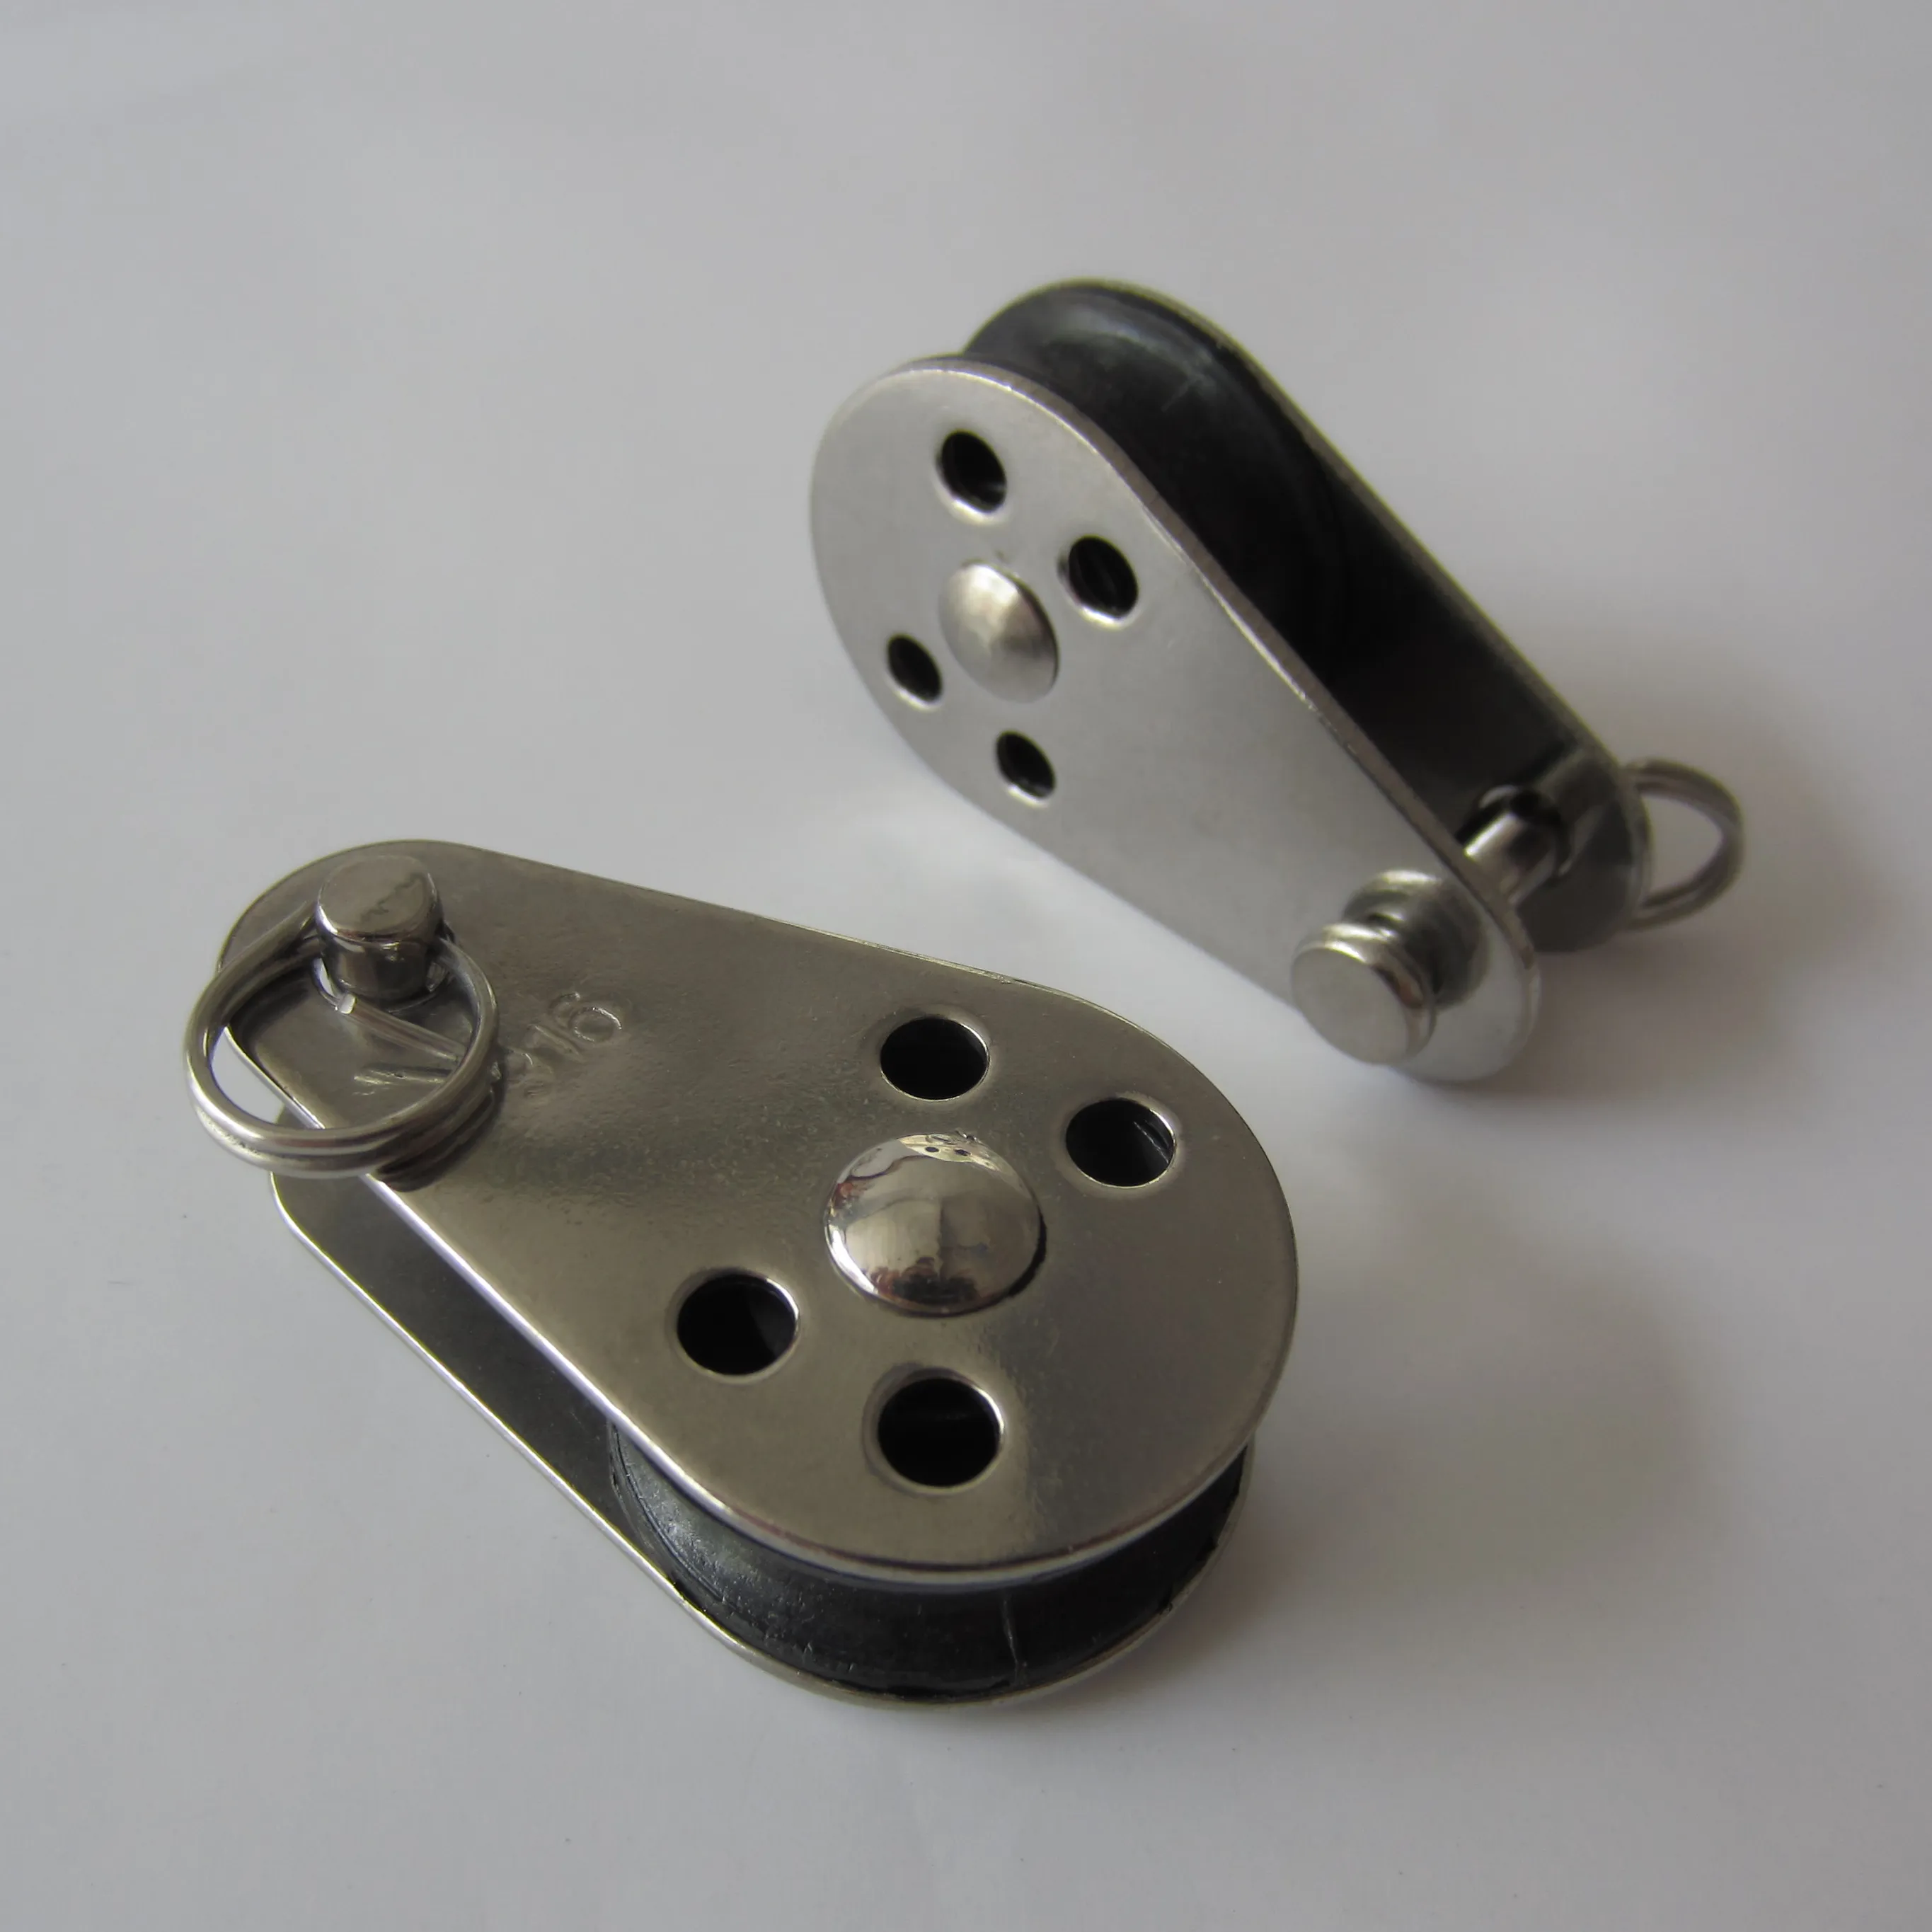 Stainless Steel Pulley Block for Marine and industrial rigging aplications